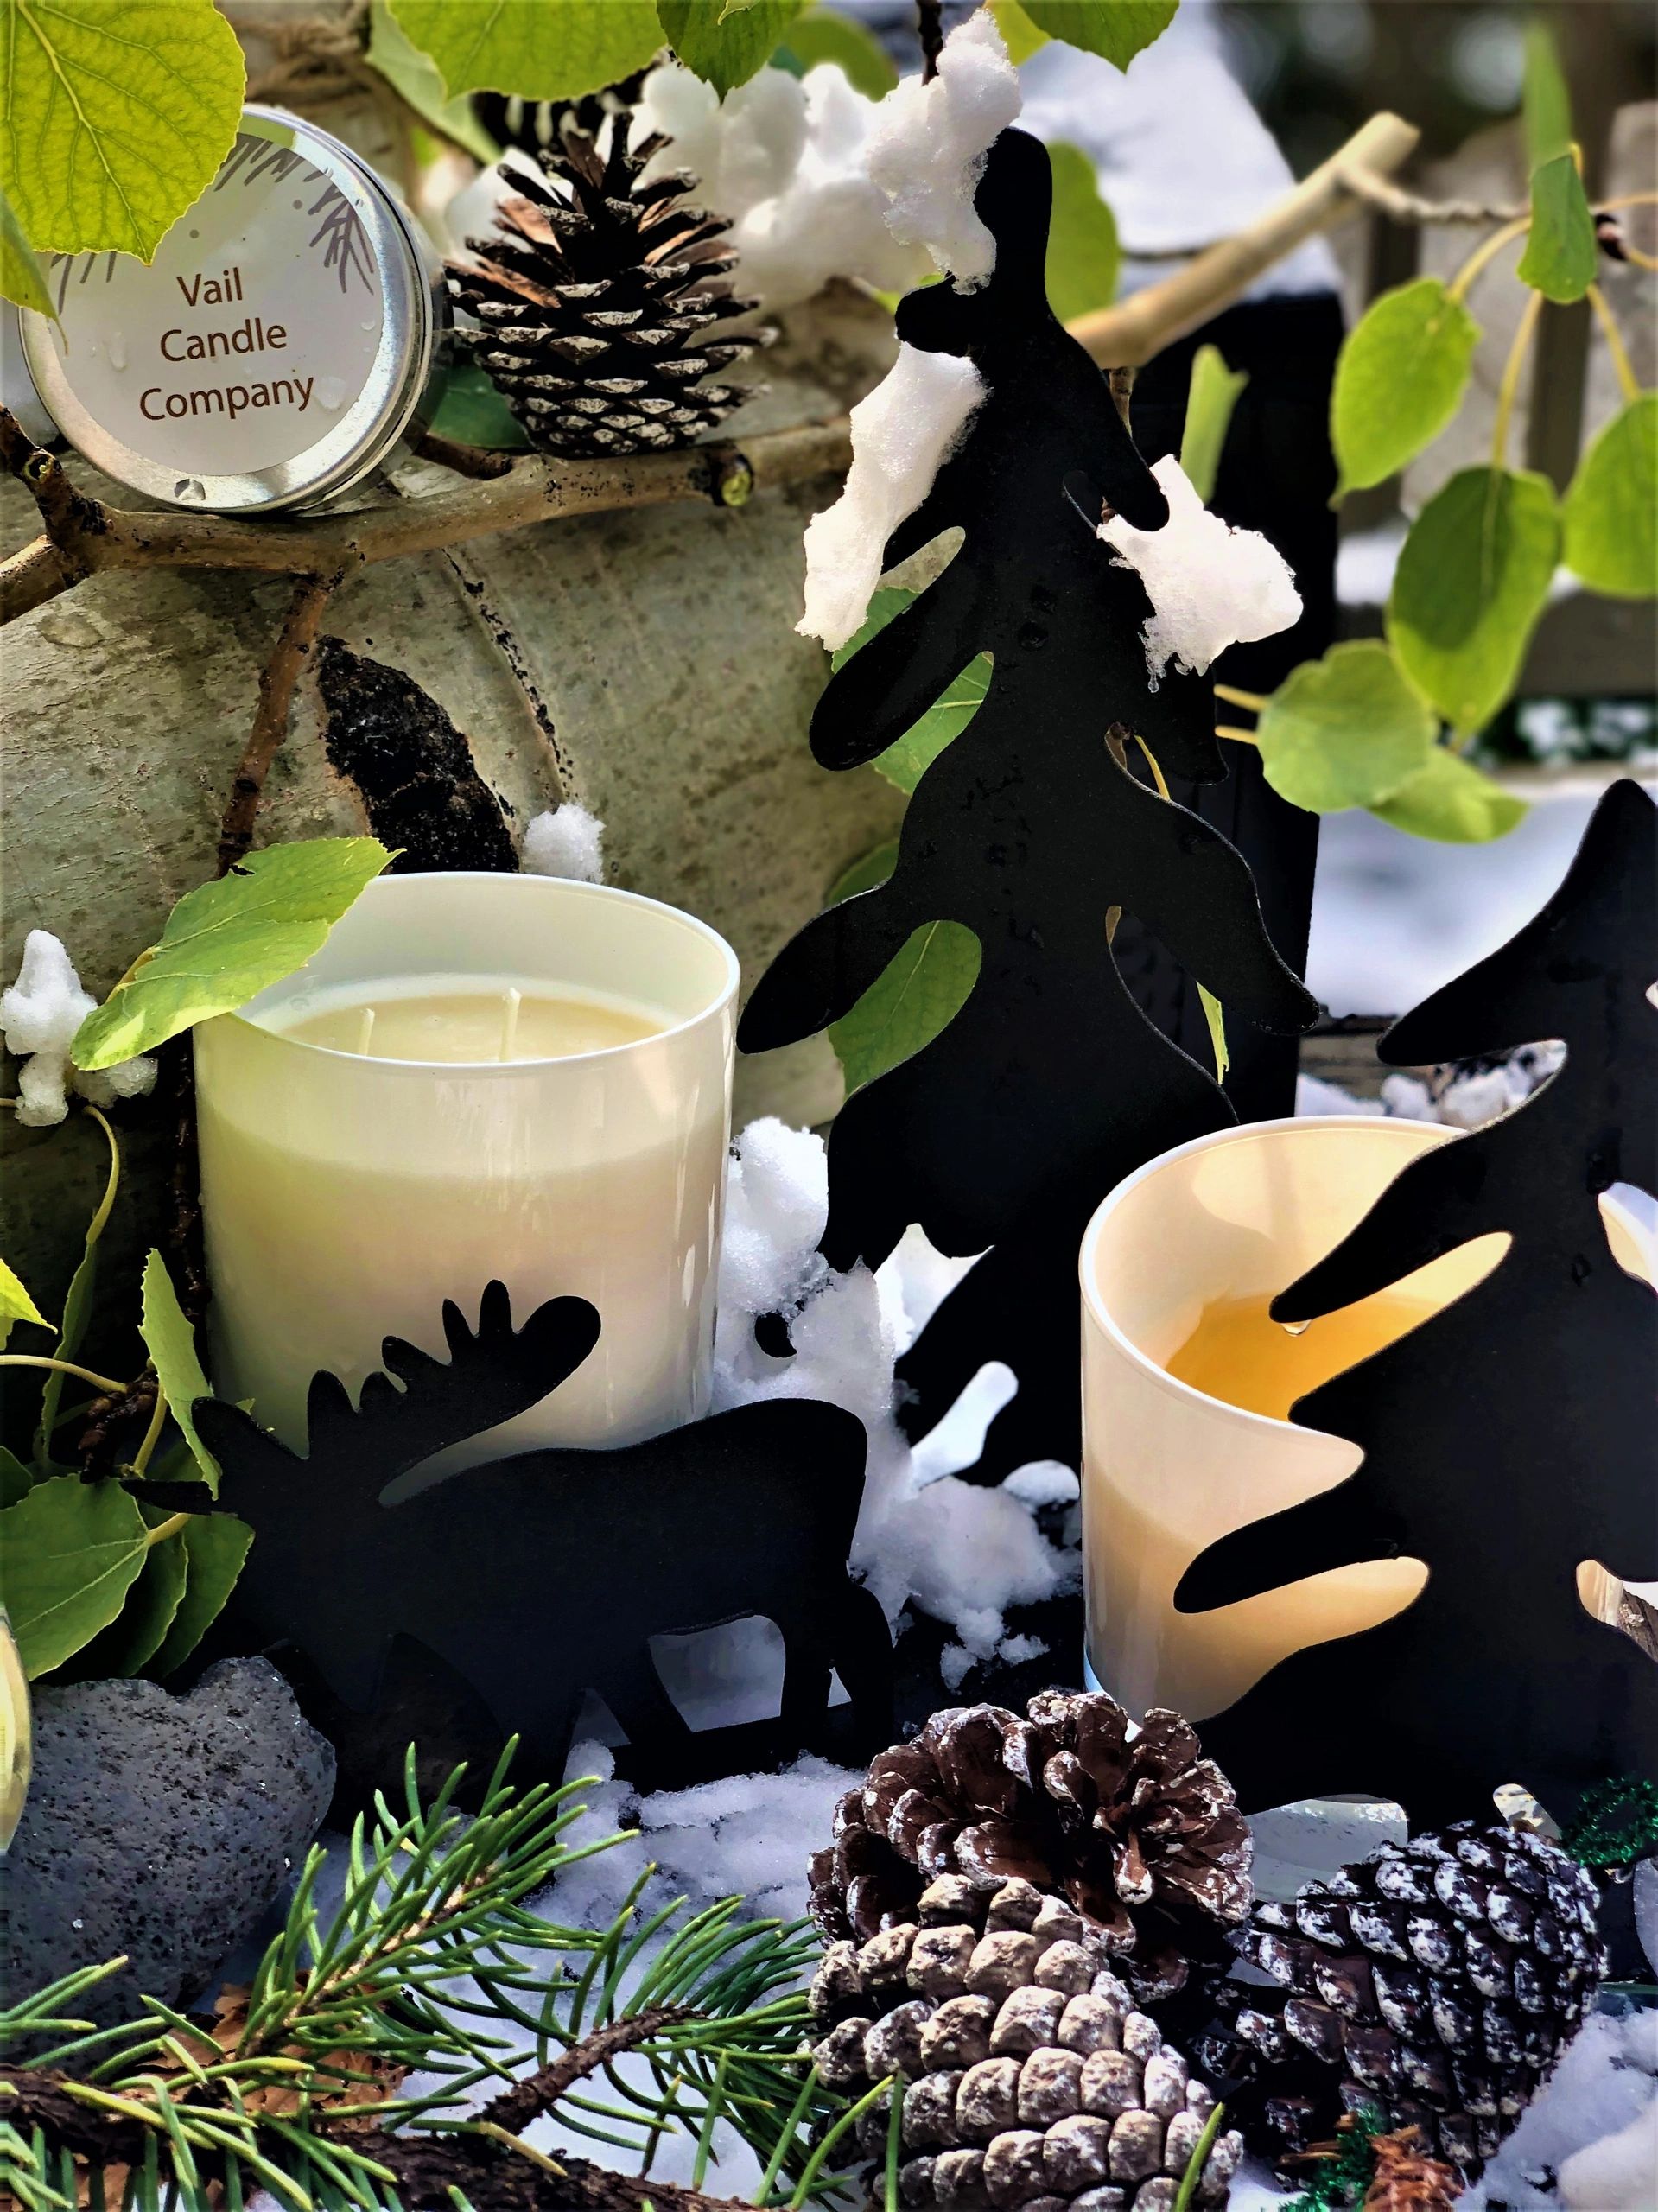 Luxury Candles in Vail Valley Colorado, surrounded by pine cones, aspen tree leaves and snow.